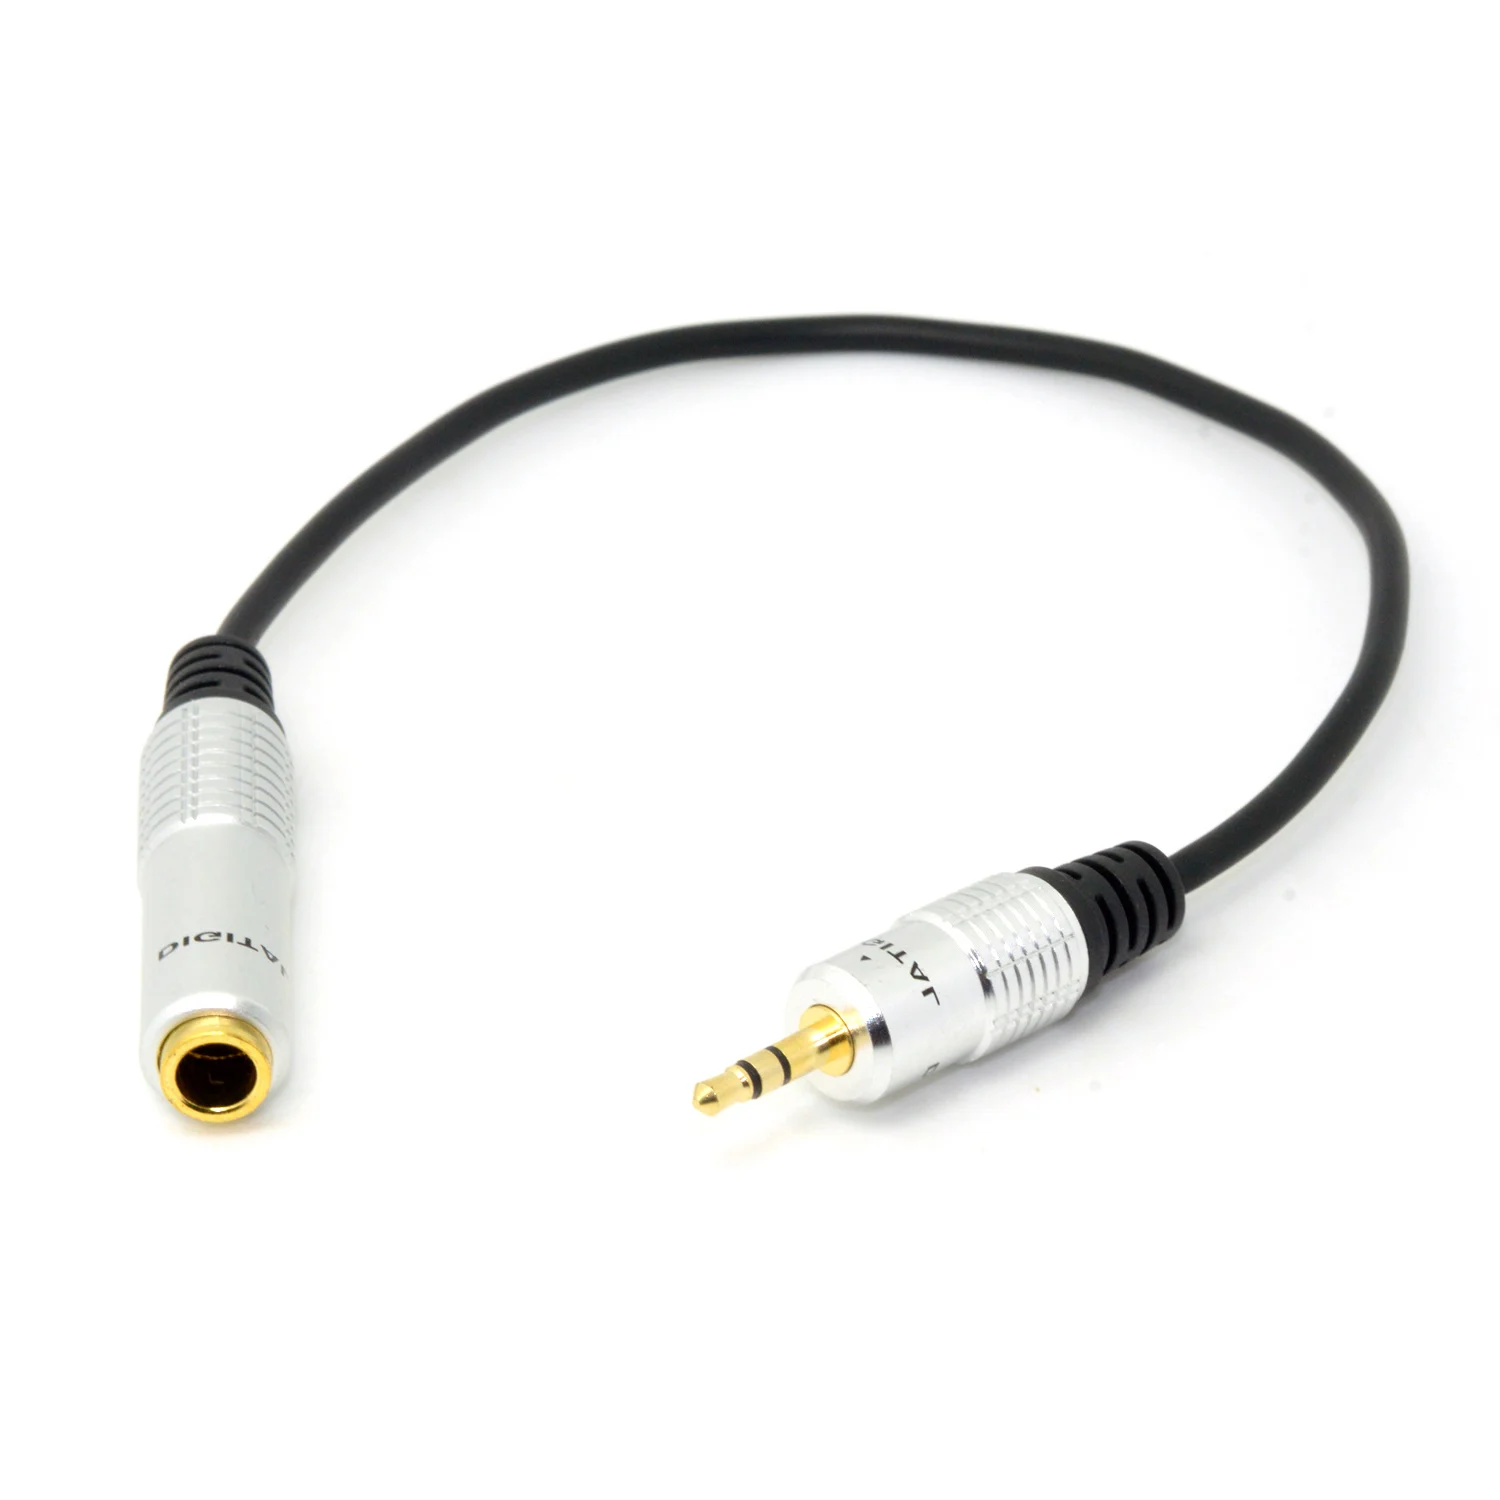 

Jimier CY 20cm Audio Aux 6.35mm 1/4" Female to 3.5mm 1/8" Male Stereo Headphone Plug Adapter Converter Cable